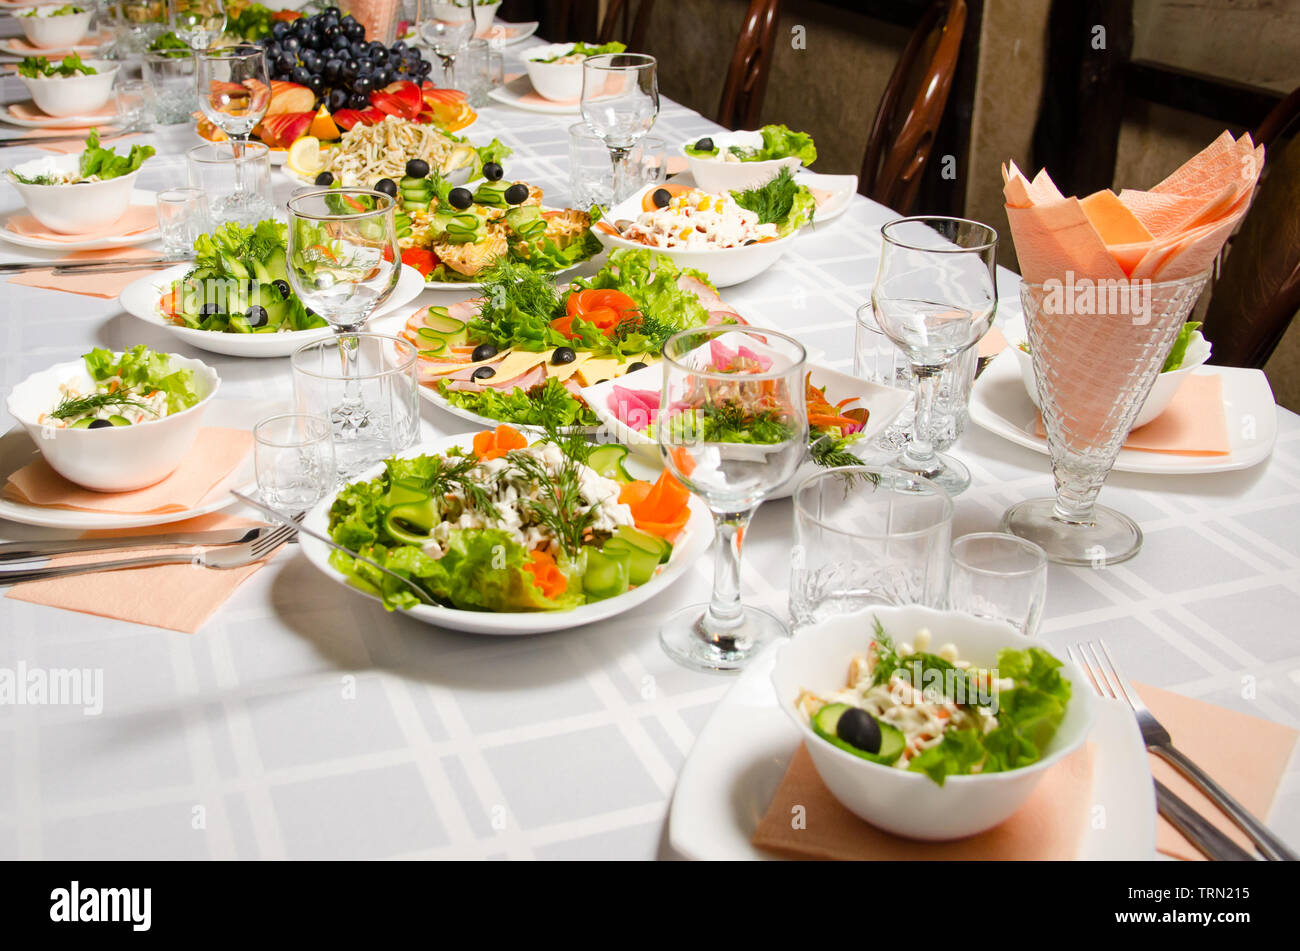 table lined with variety of dishes from which the centerpiece is dish with banquet cutting with ham and dish with several tartlets with chicken and ha Stock Photo